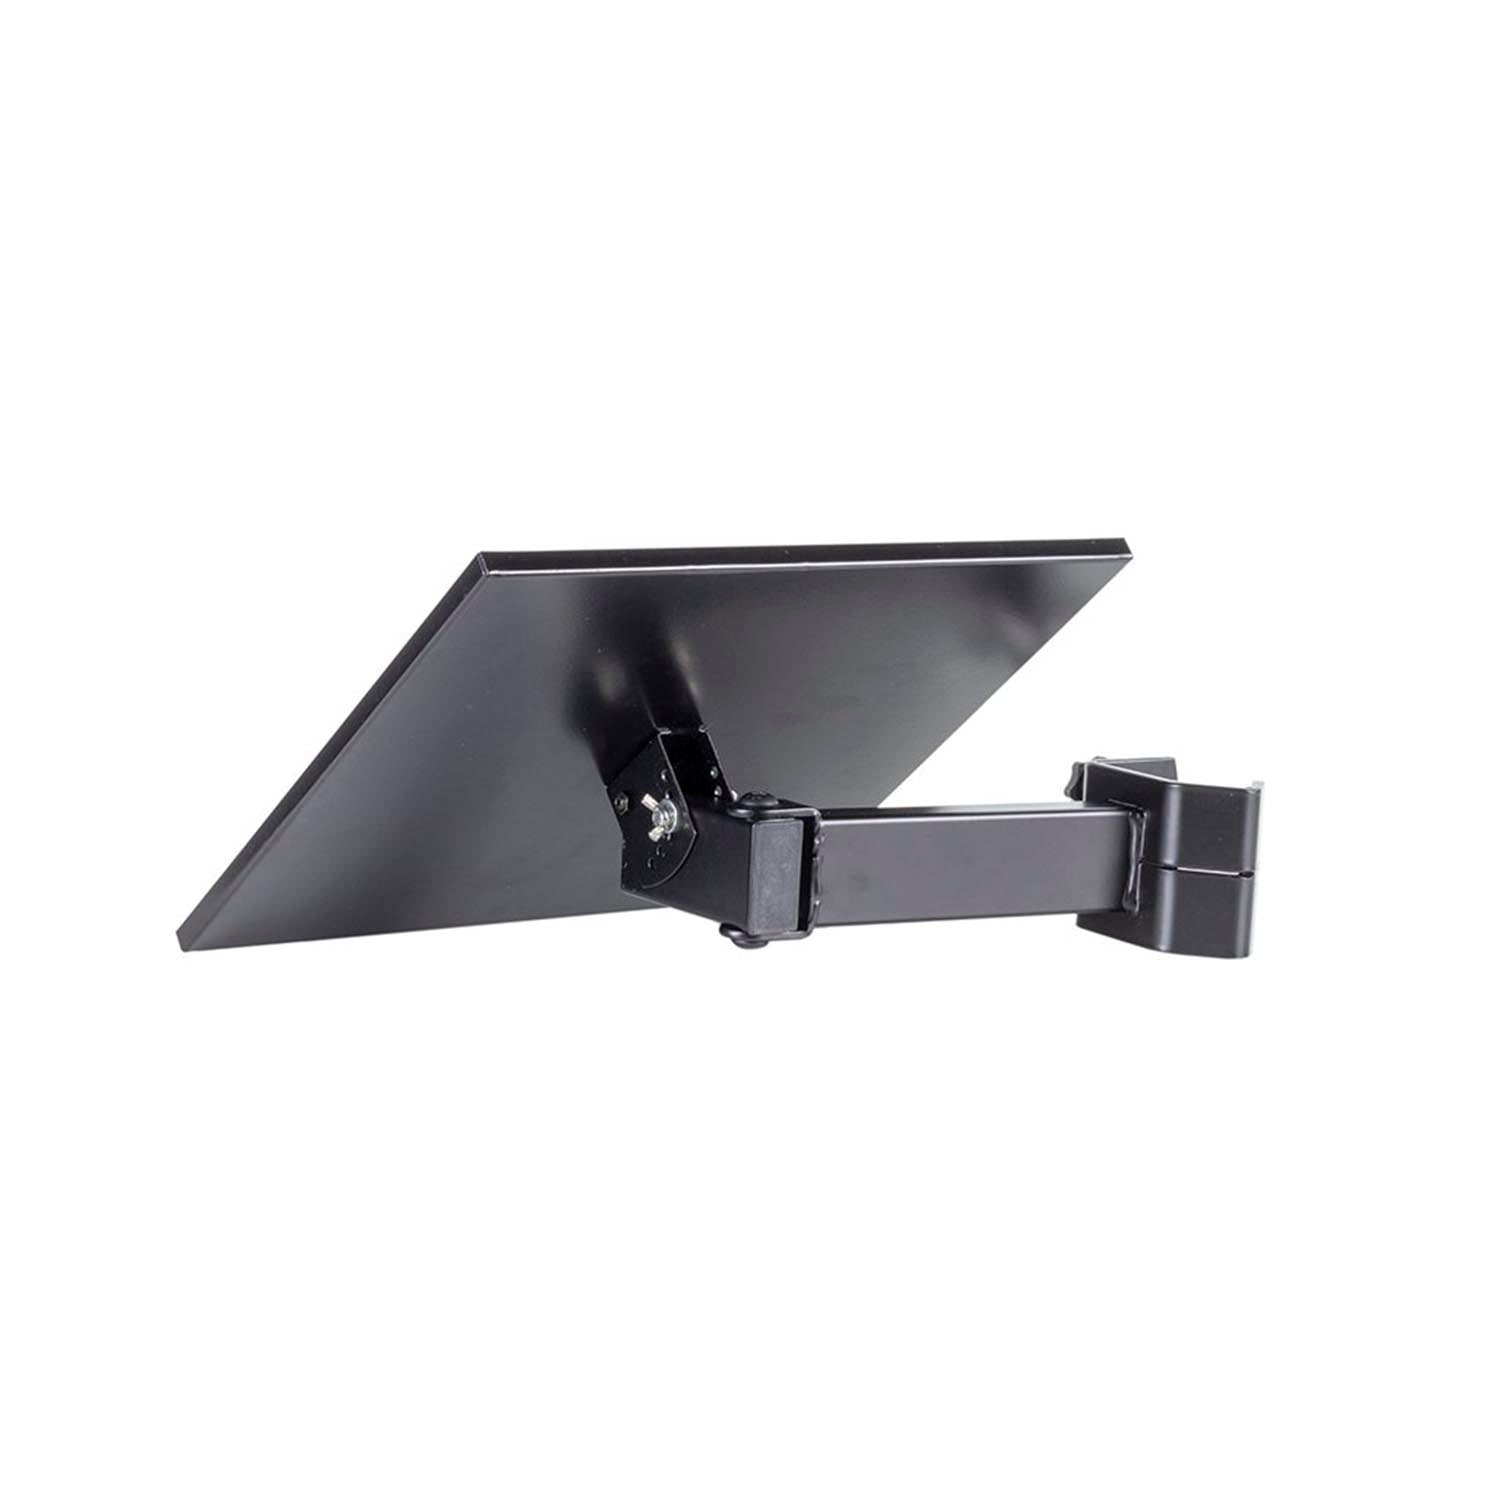 Headliner HL31000, Accessory Tray For Mic Stands, Speakers Stands and Lighting Bars Mount - Hollywood DJ